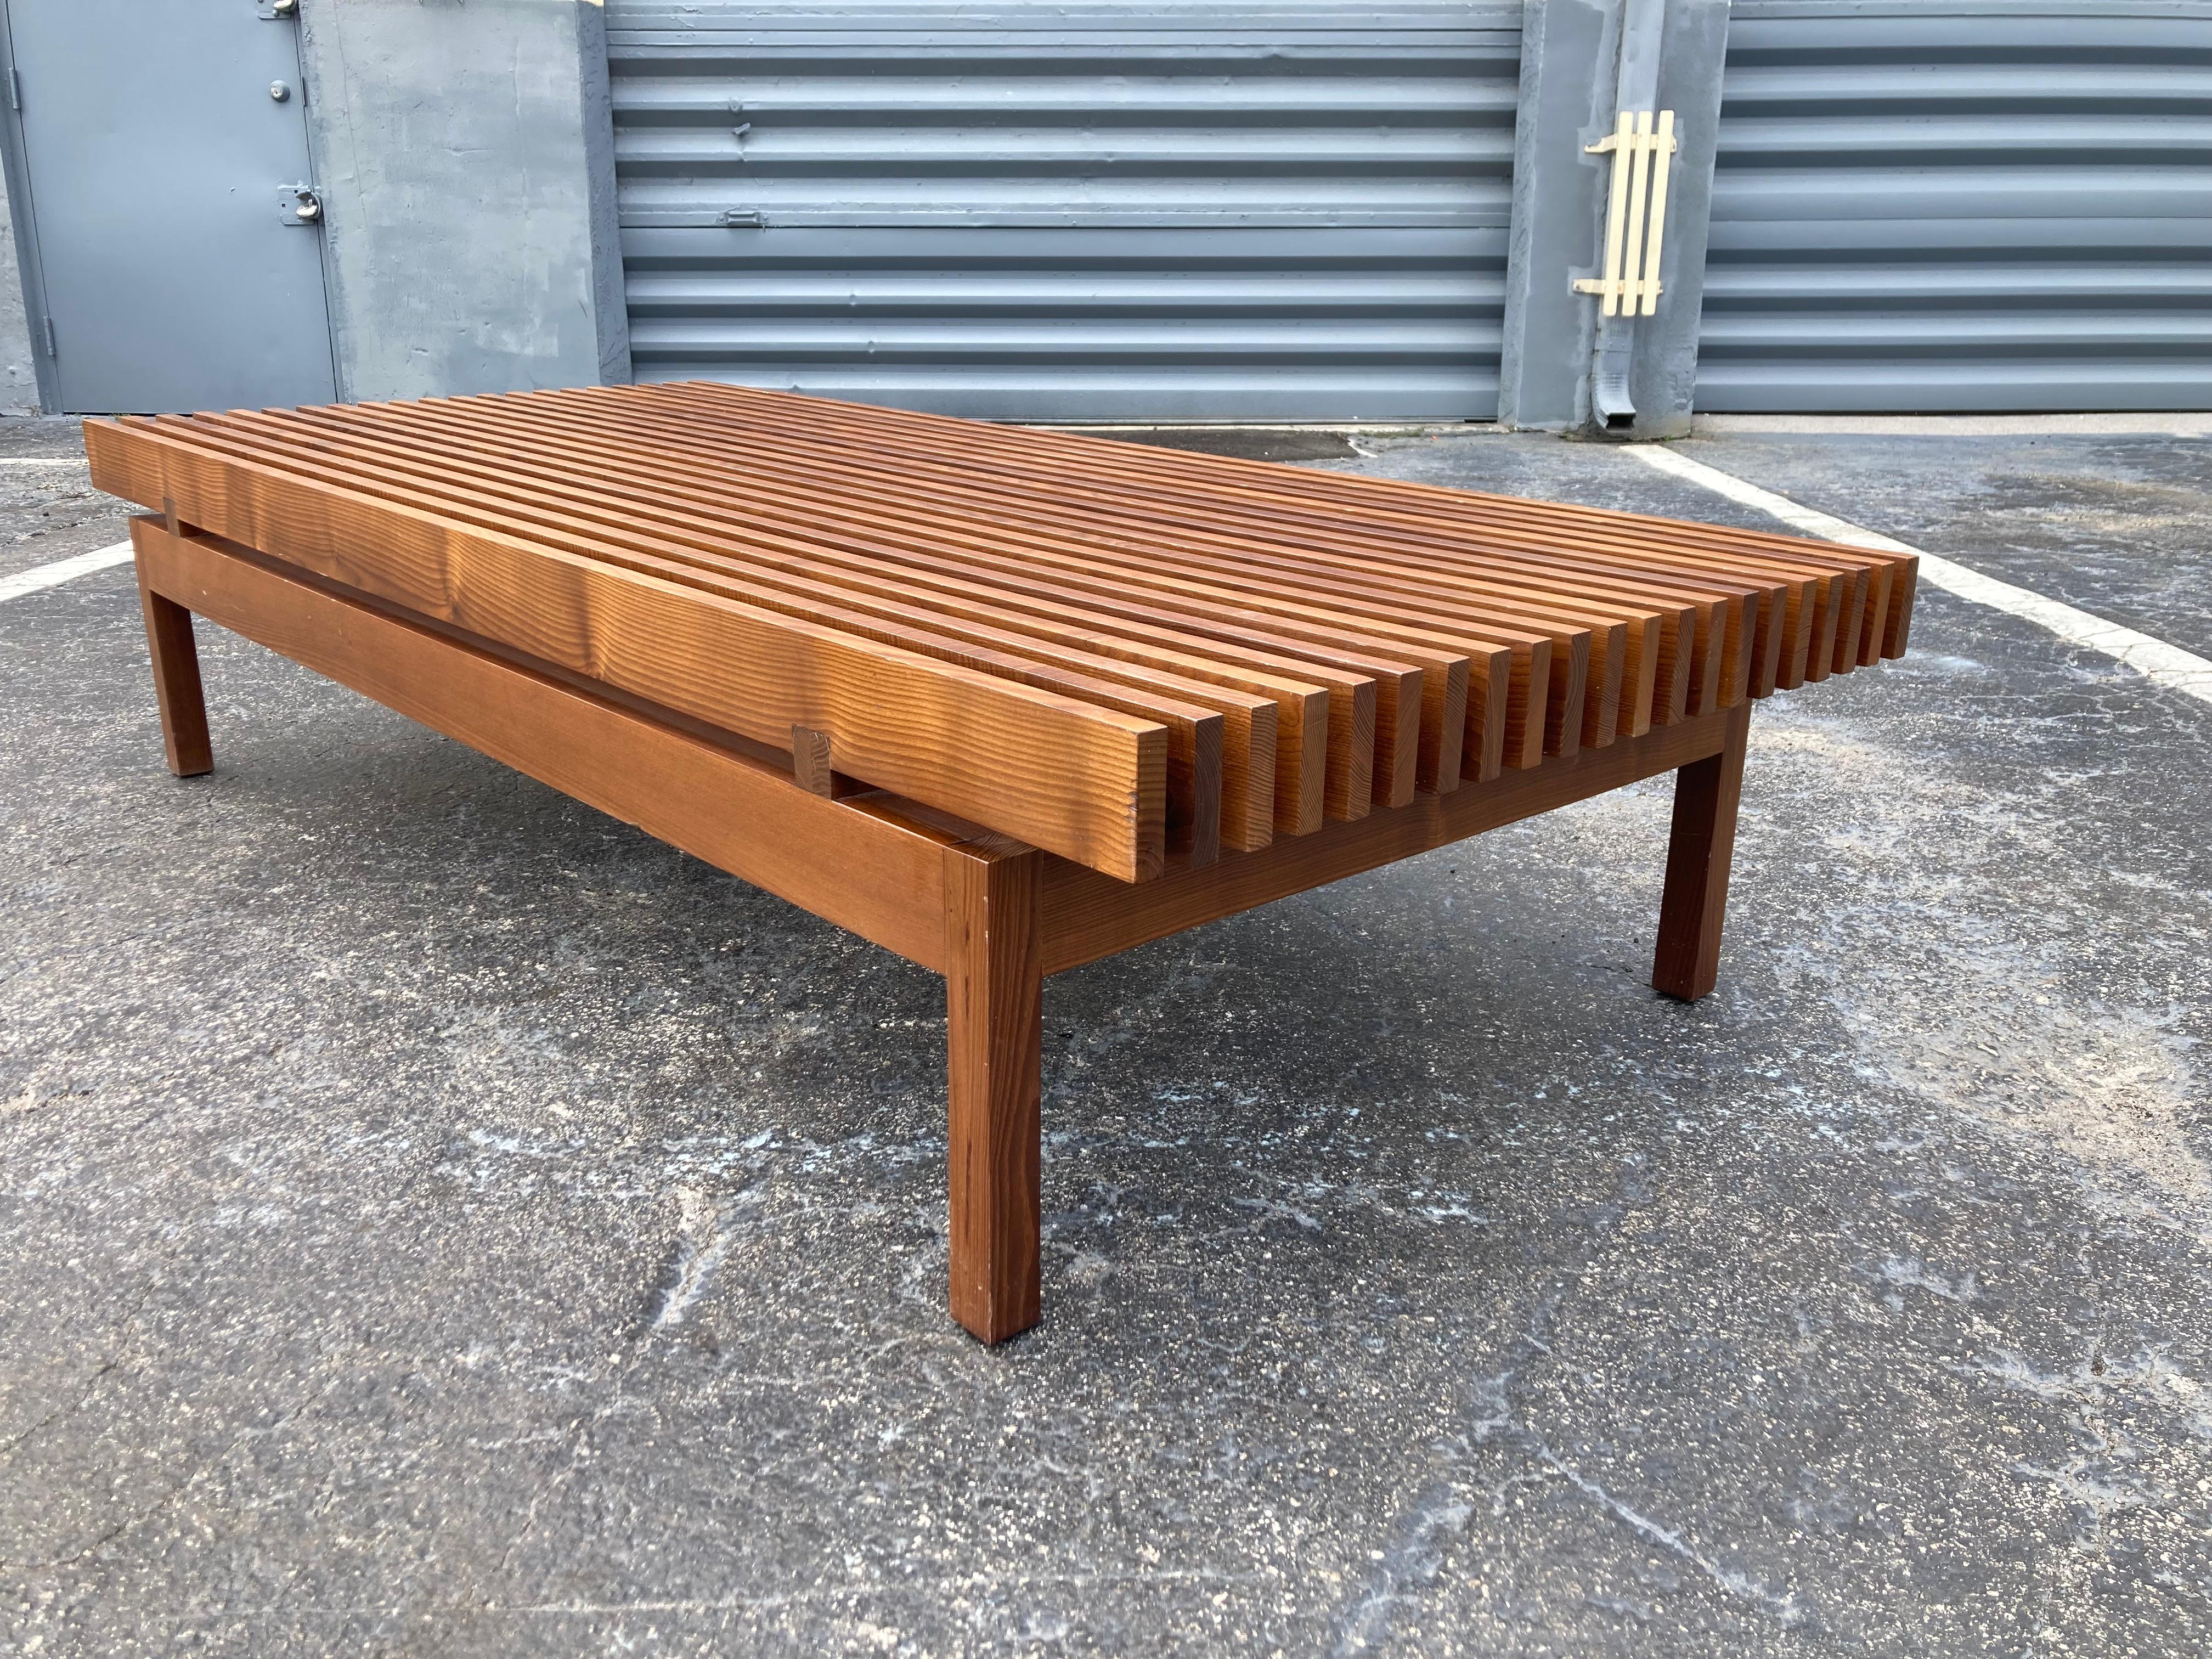 Stunning Coffee Table / Bench / Daybed, made completely of solid wood. Great design and ready for a new home. In the style of Charlotte Perriand. 